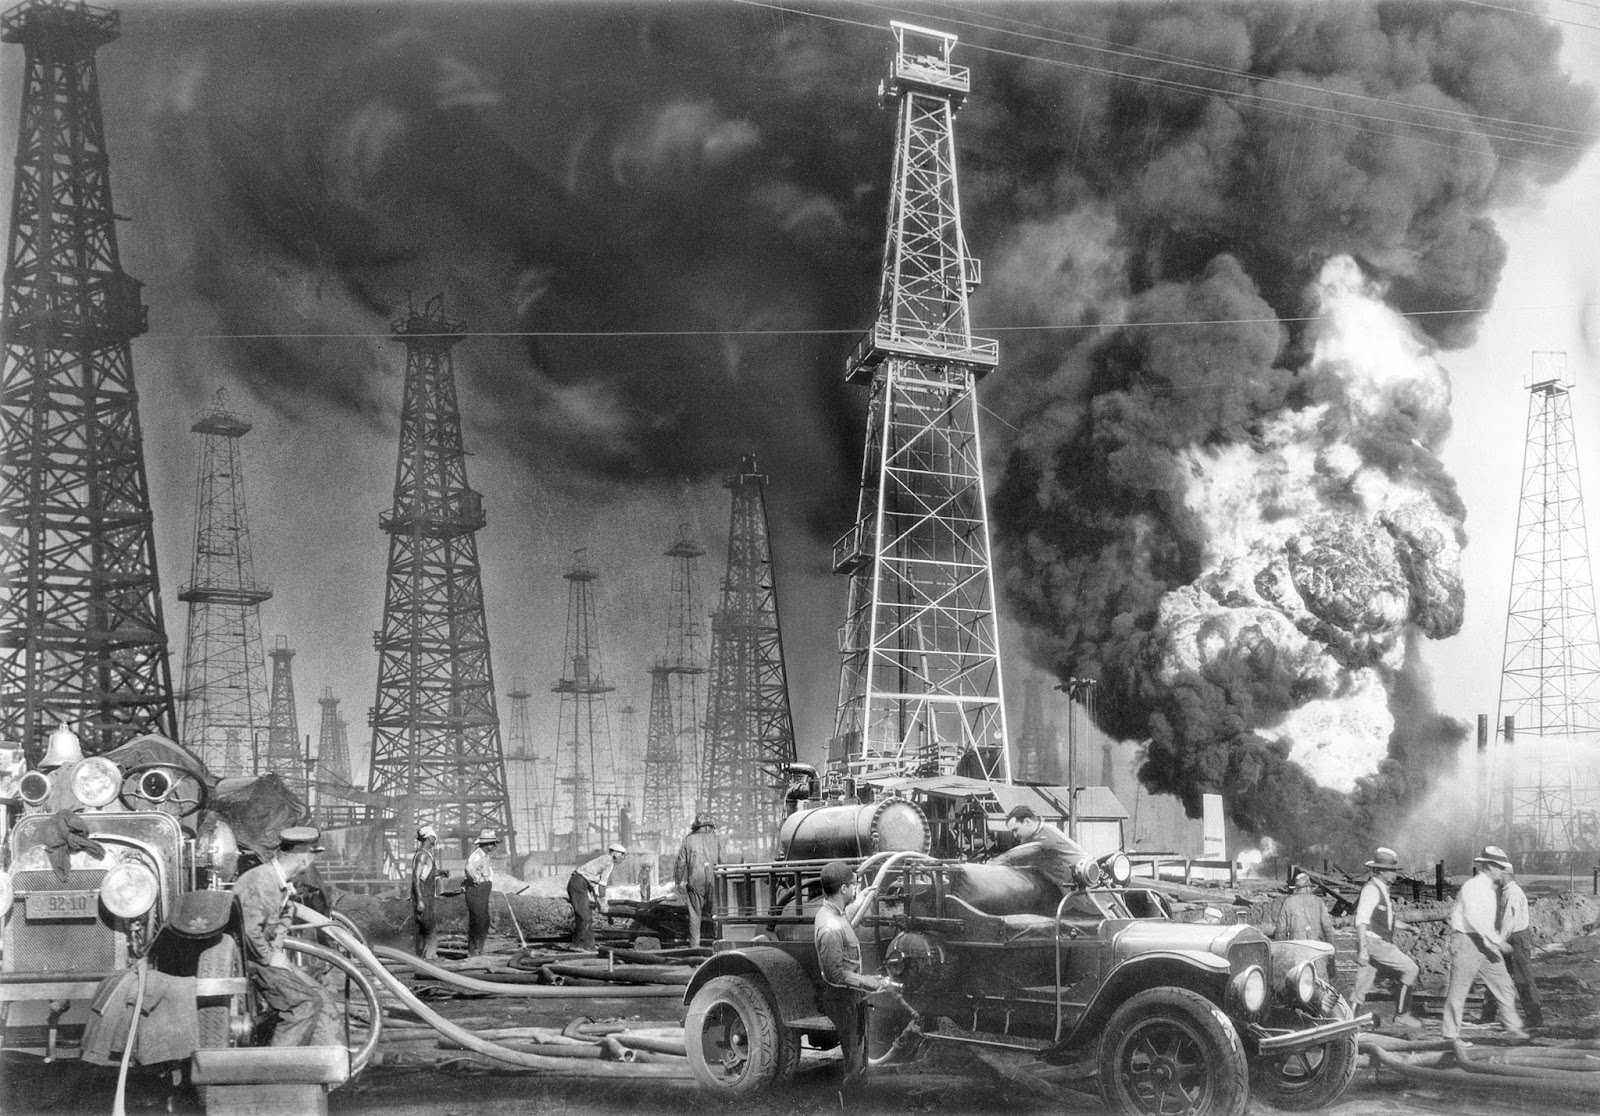 Oil well fire, Southern California, Signal Hill, 1931